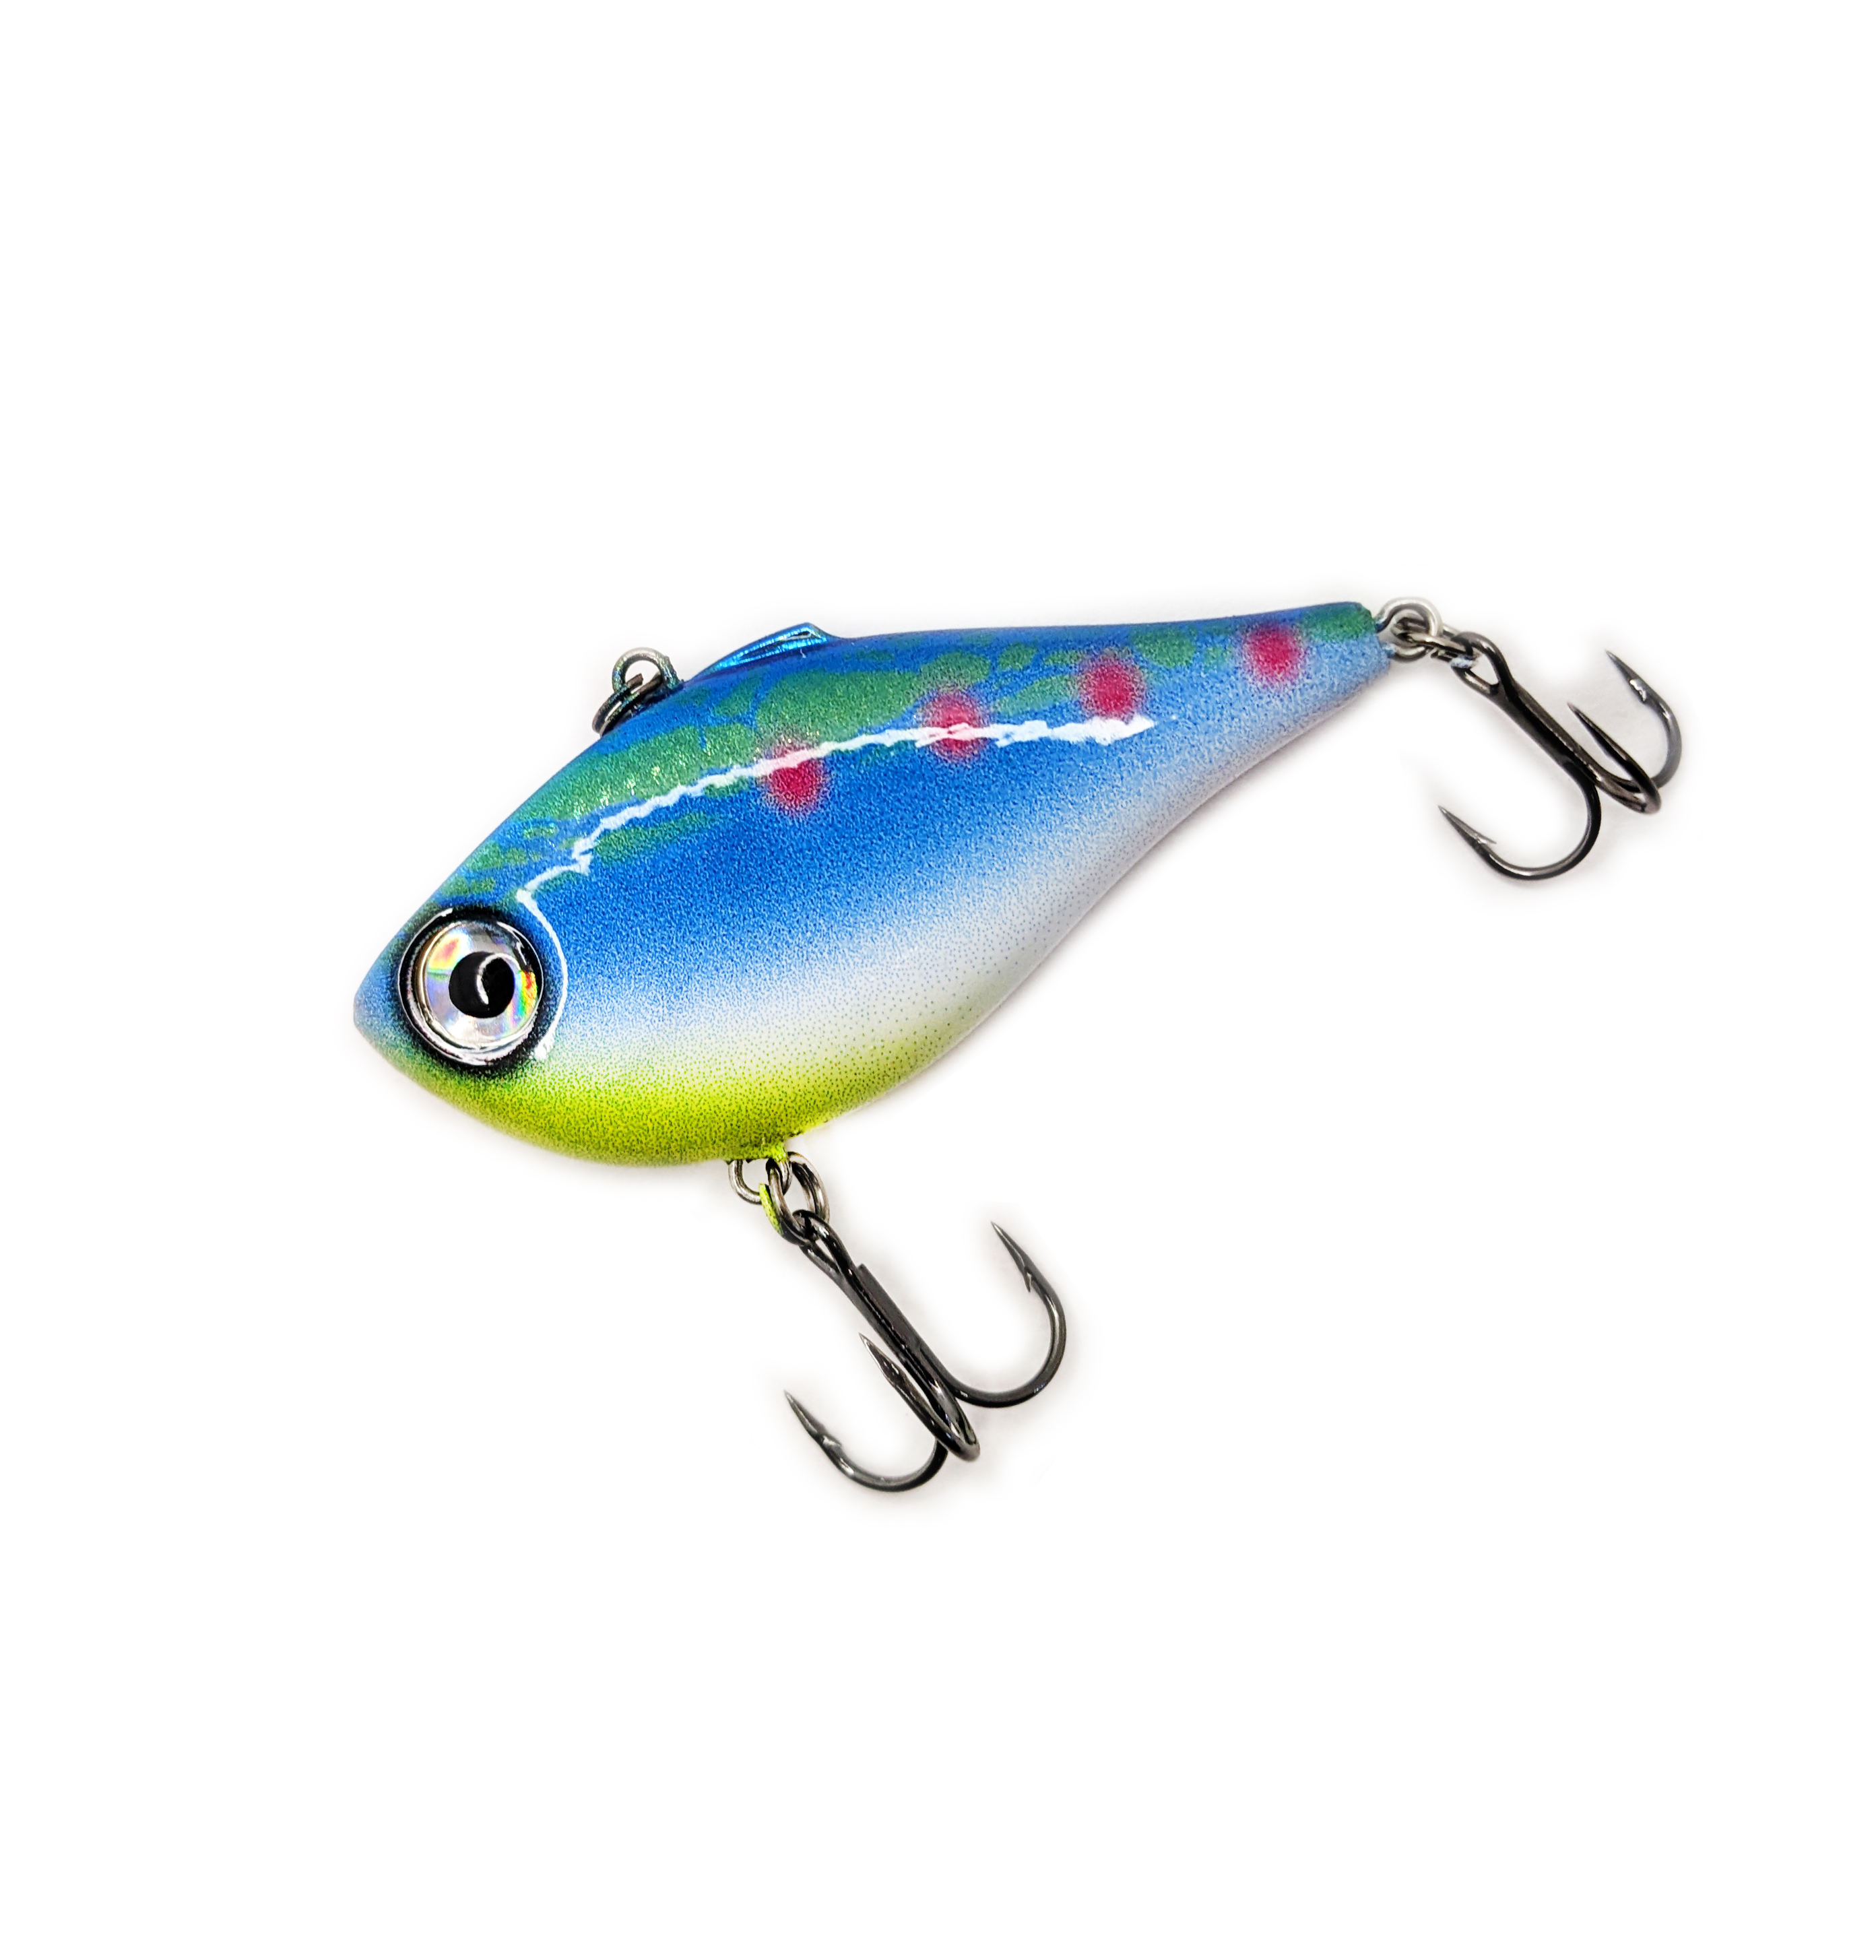 New Colors for the Rapala® Rippin Rap 